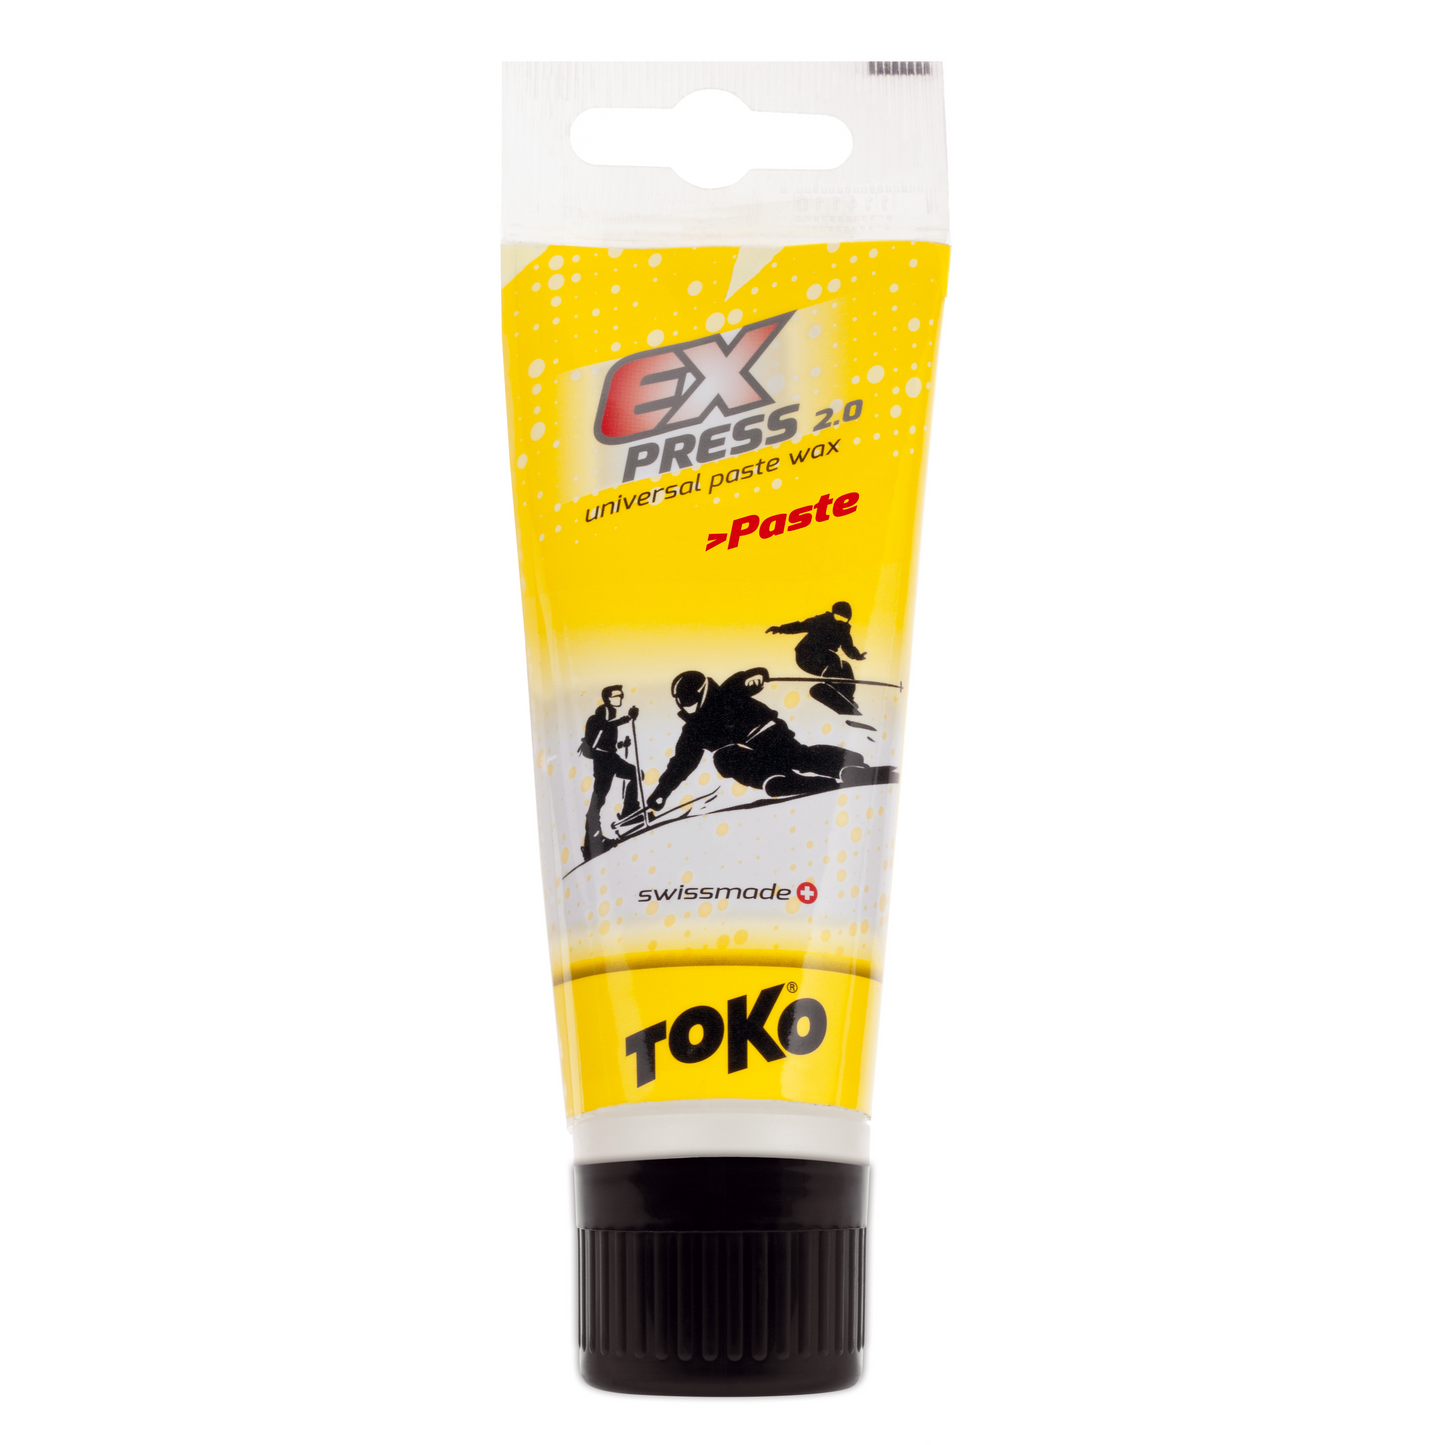 A product picture of the Toko Express Paste